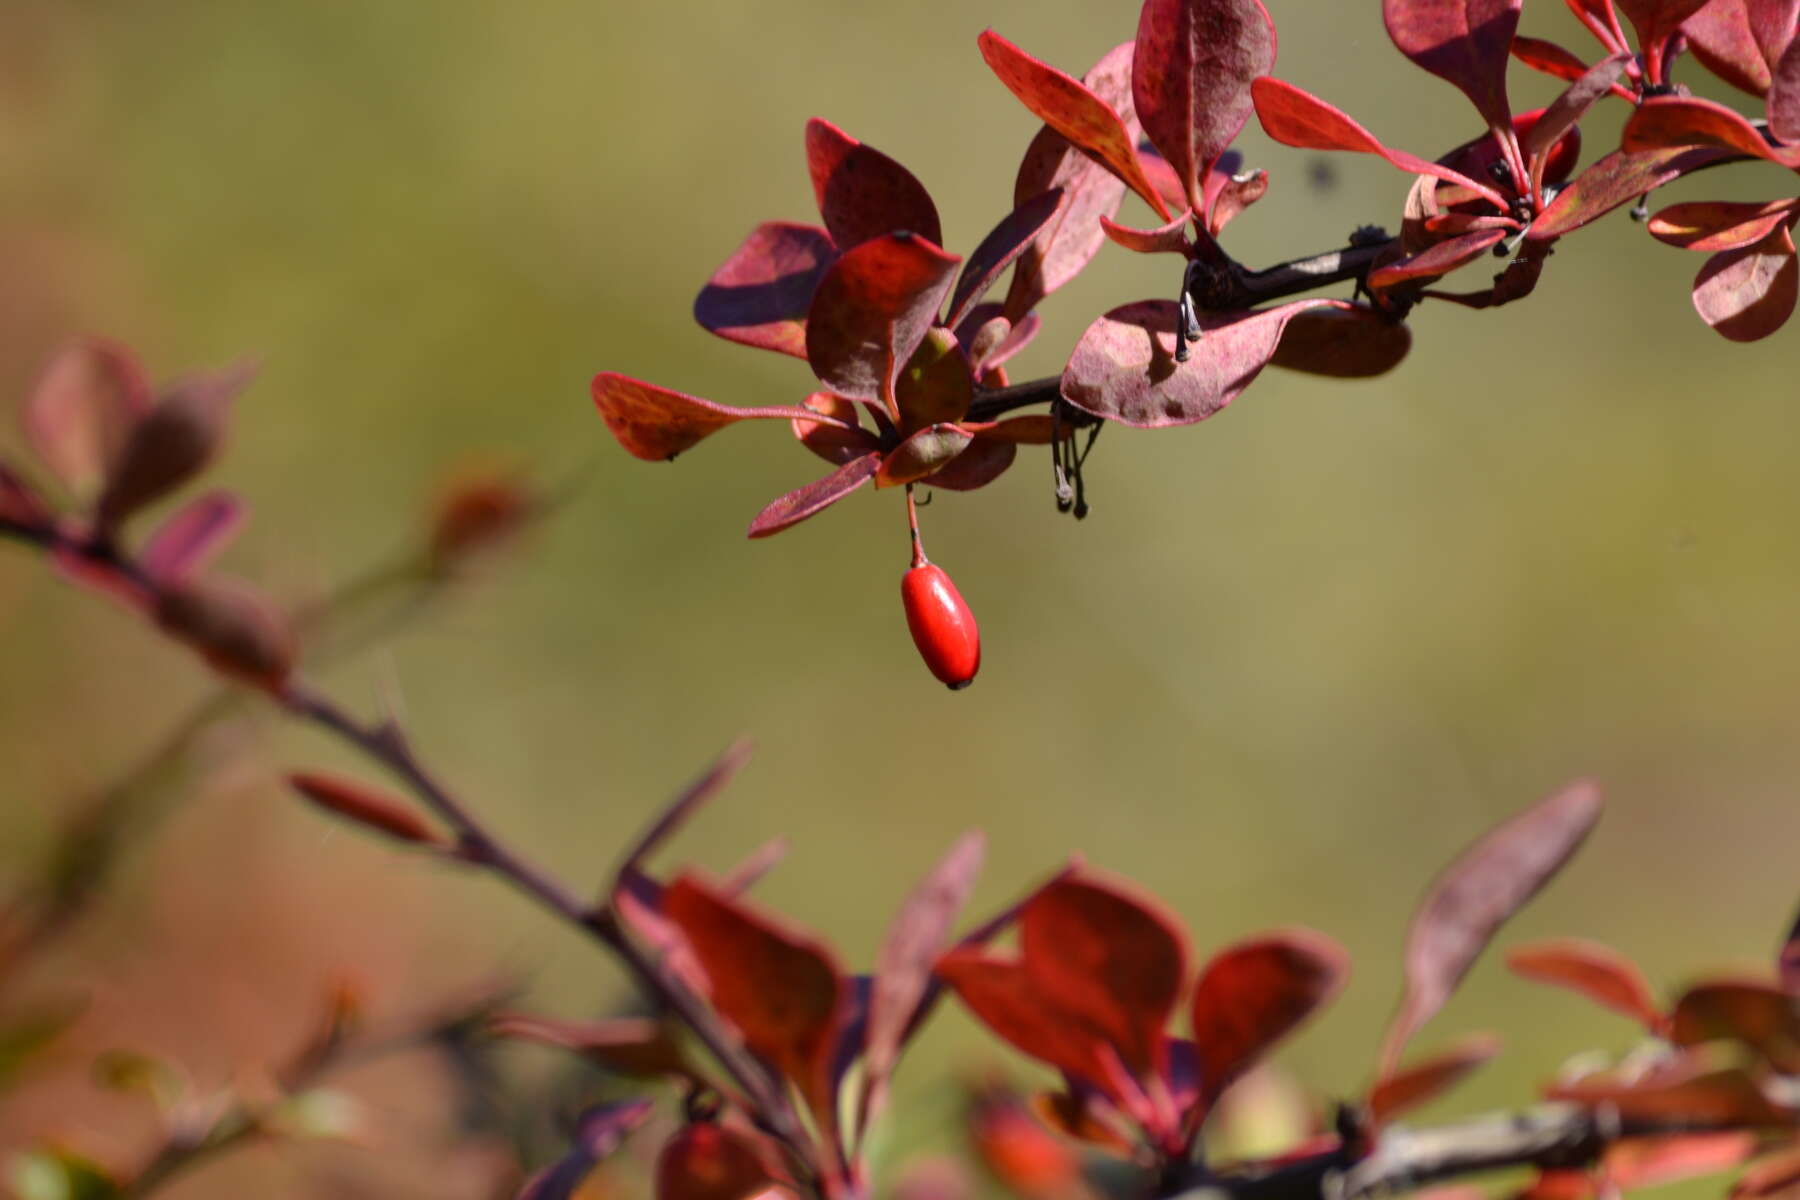 Image of Japanese barberry